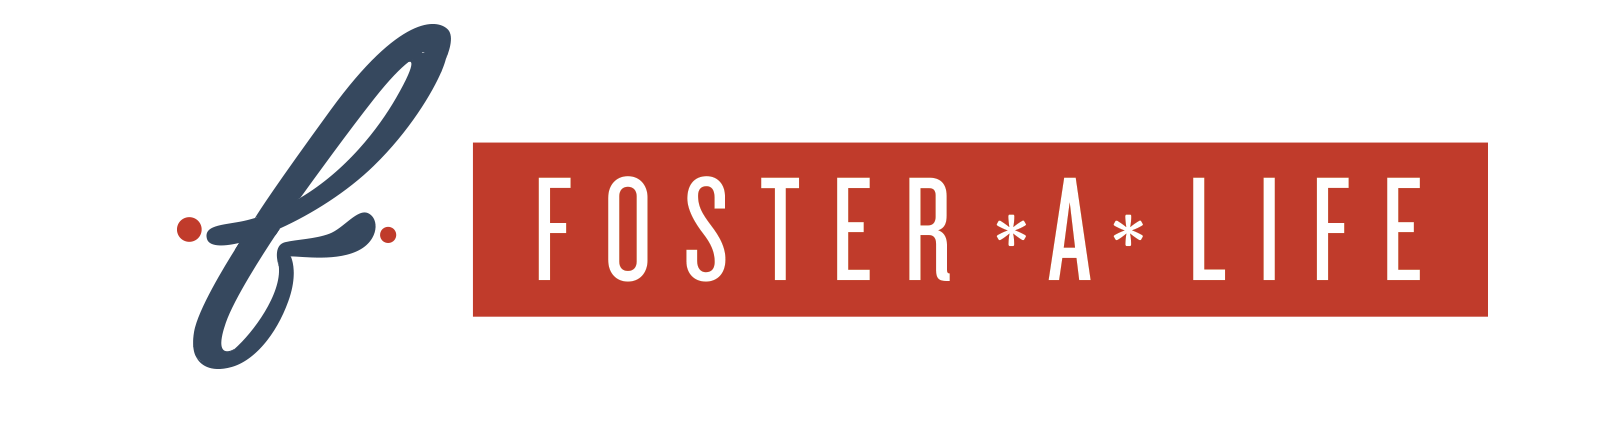 Foster*A*Life | Lubbock, Texas